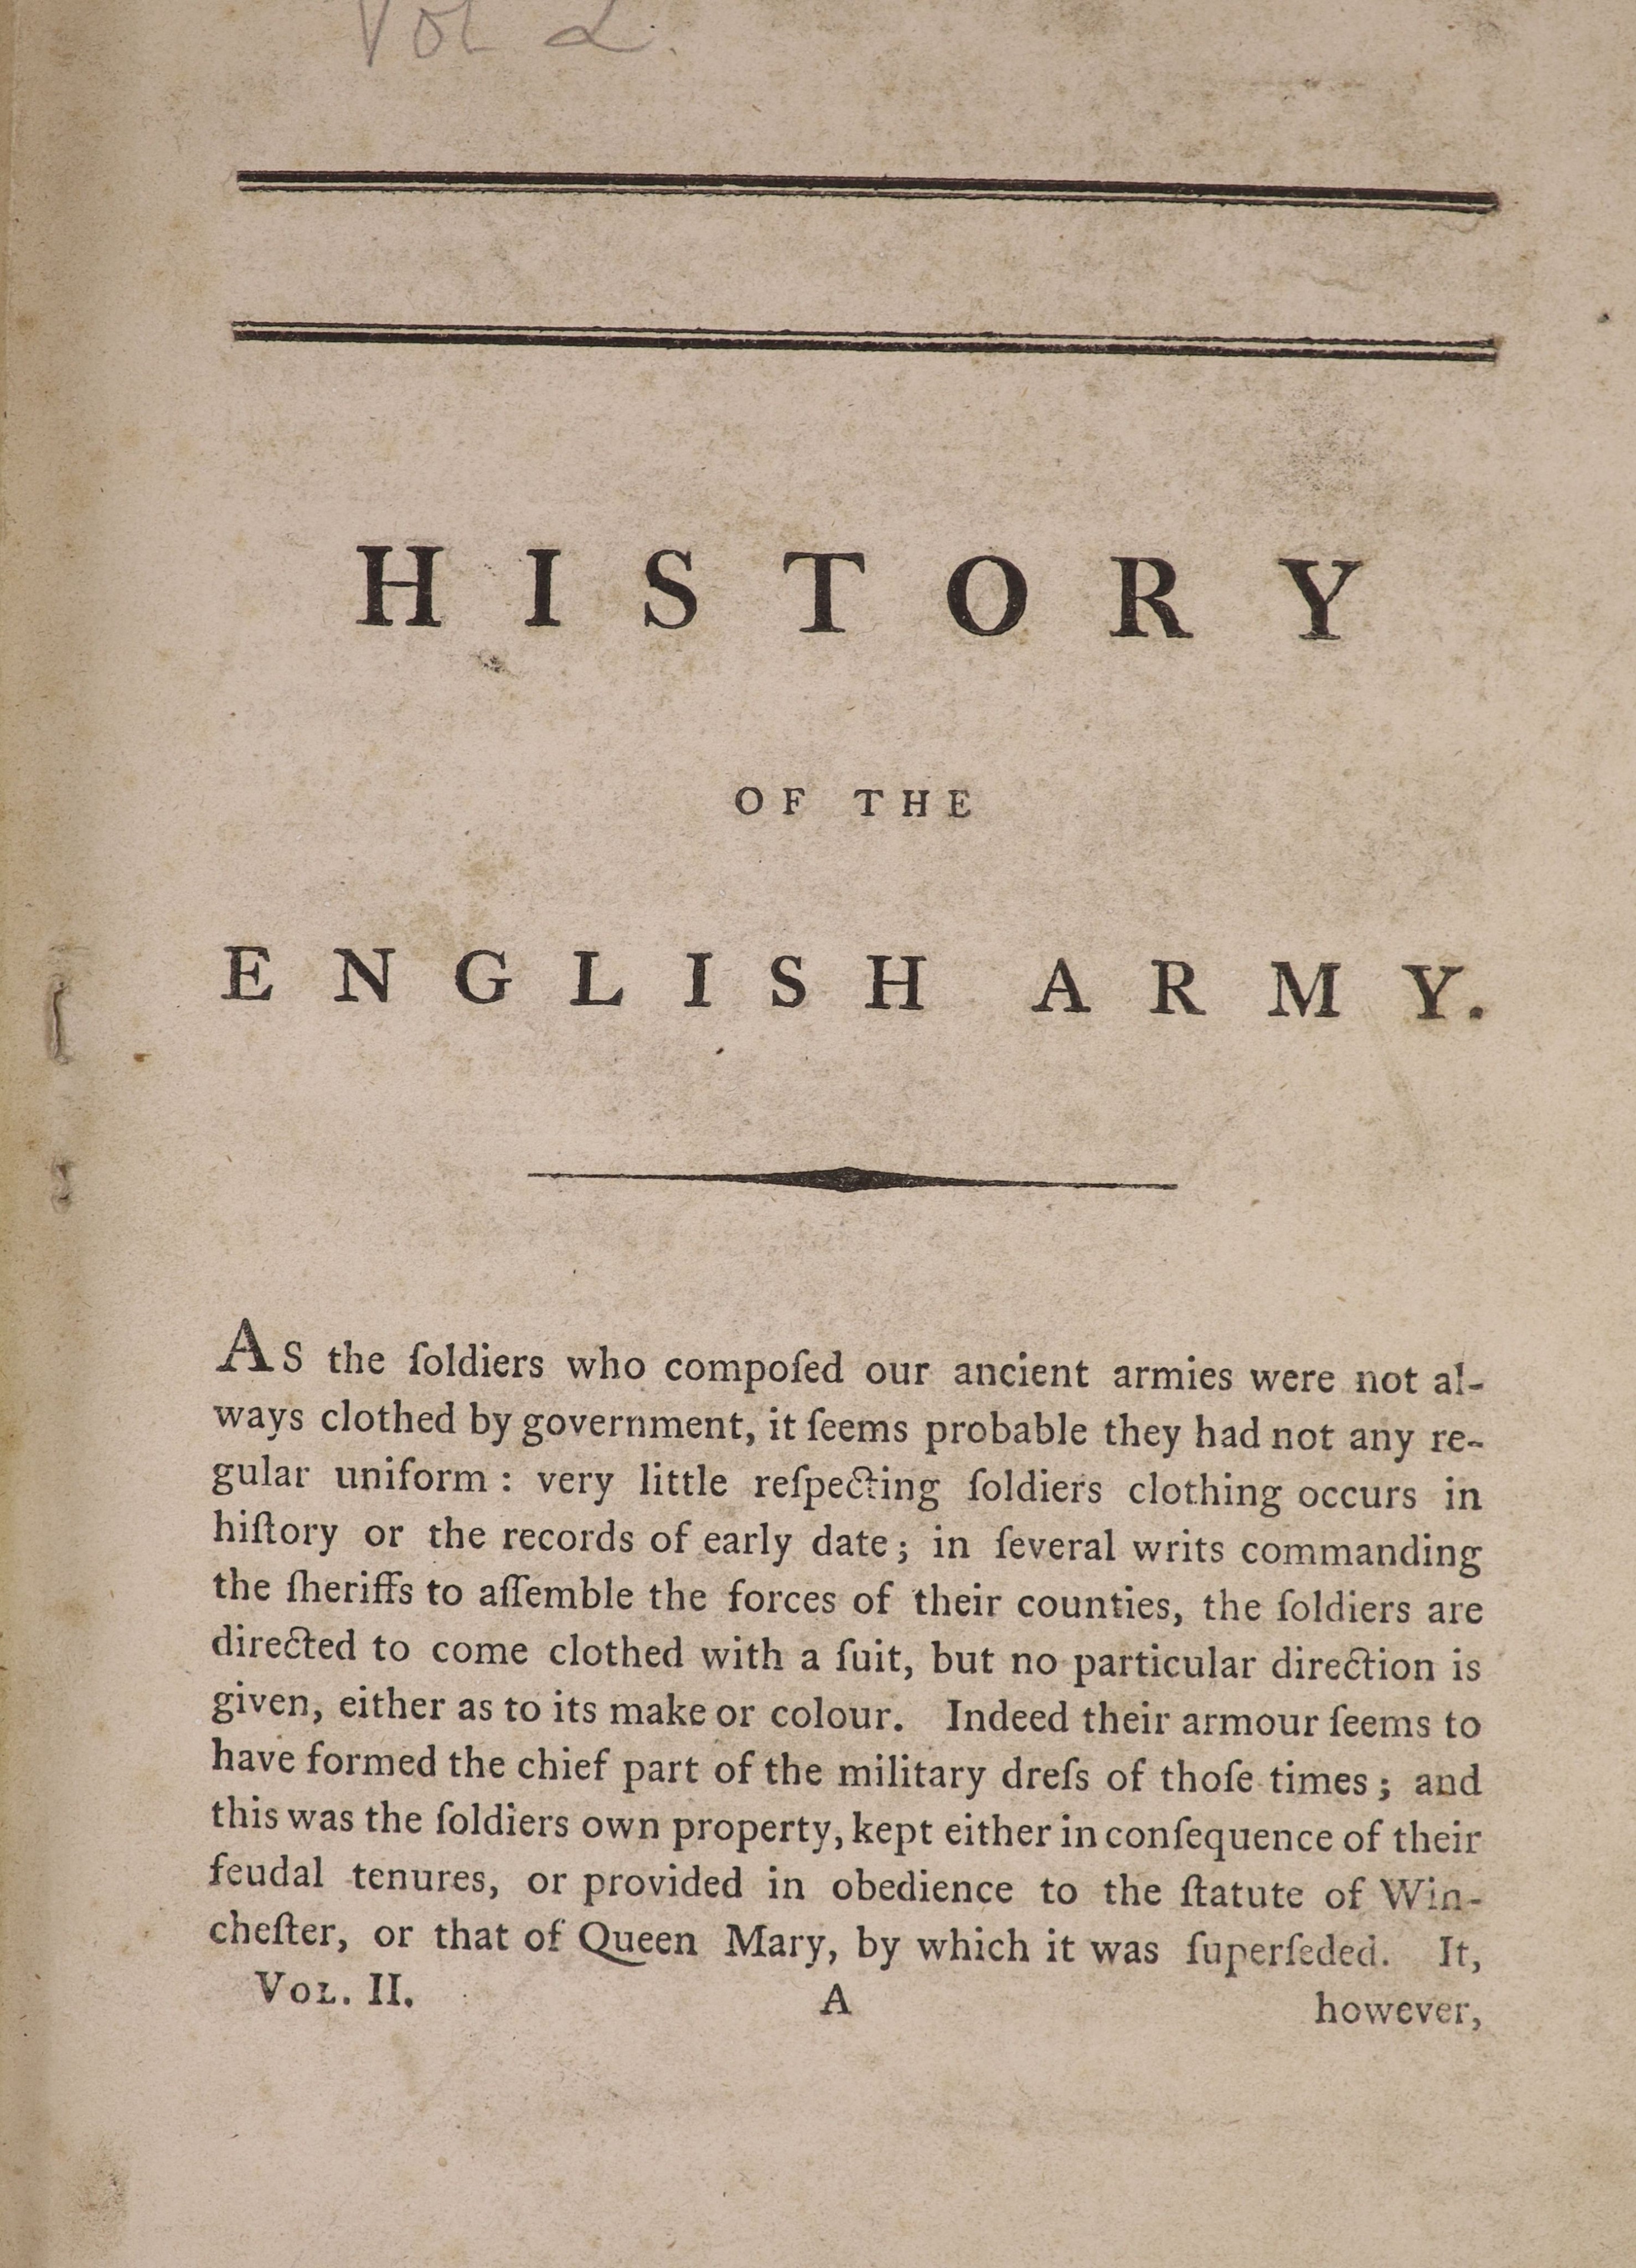 Grosse, Francis - Military Antiquities respecting a History of the English Army ... 2 vols. num. engraved plates: newly rebound green half morocco and cloth, panelled spines